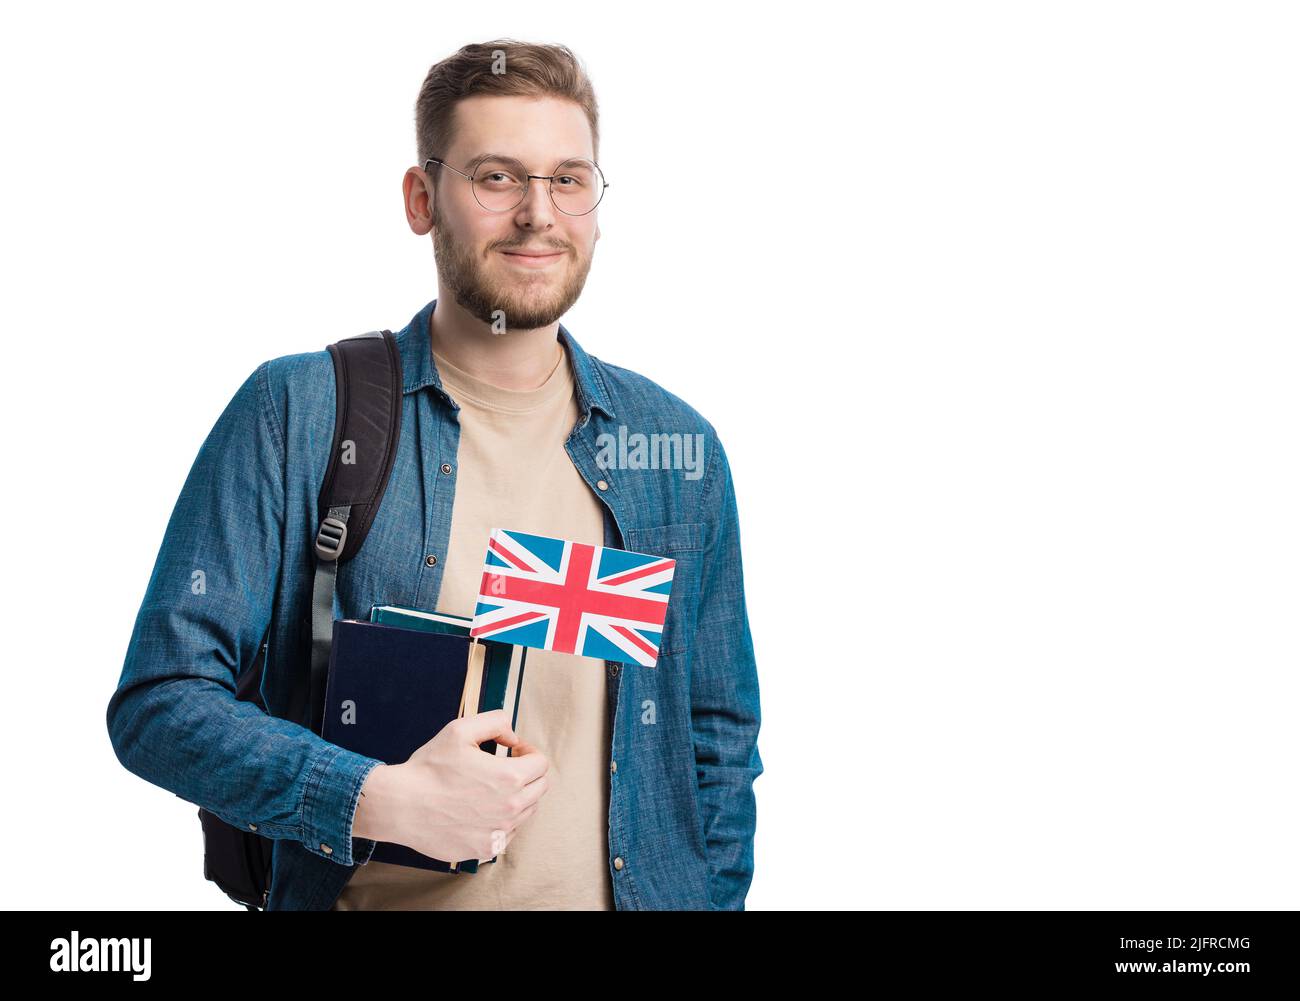 Student holding flag of Great Britain Stock Photo